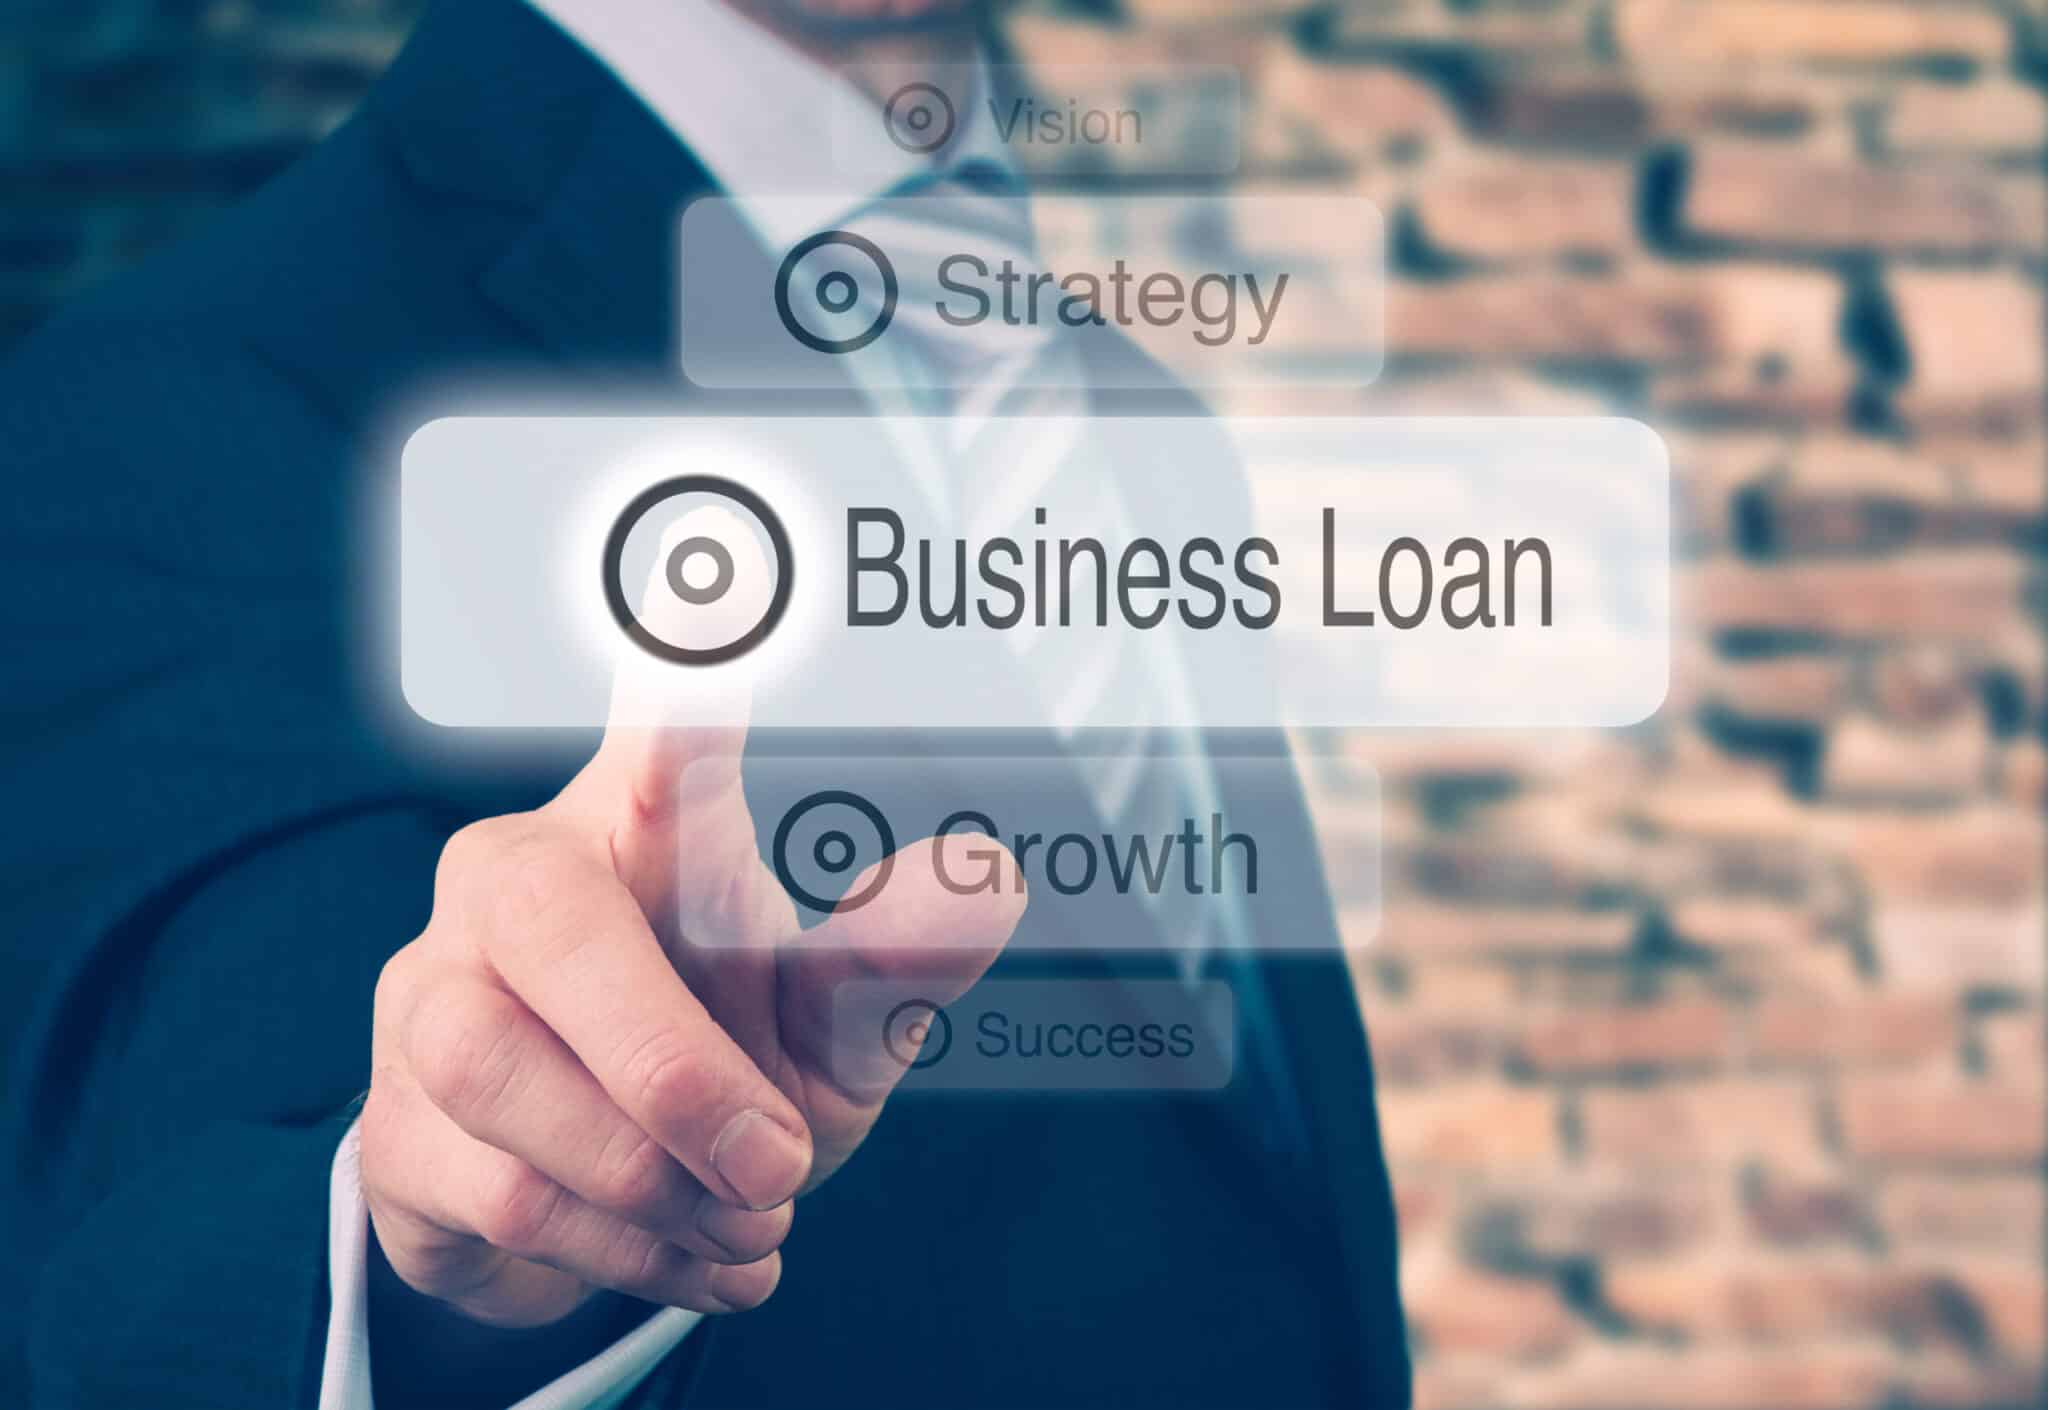 How Hard Is It to Get a Business Loan - Featured Image